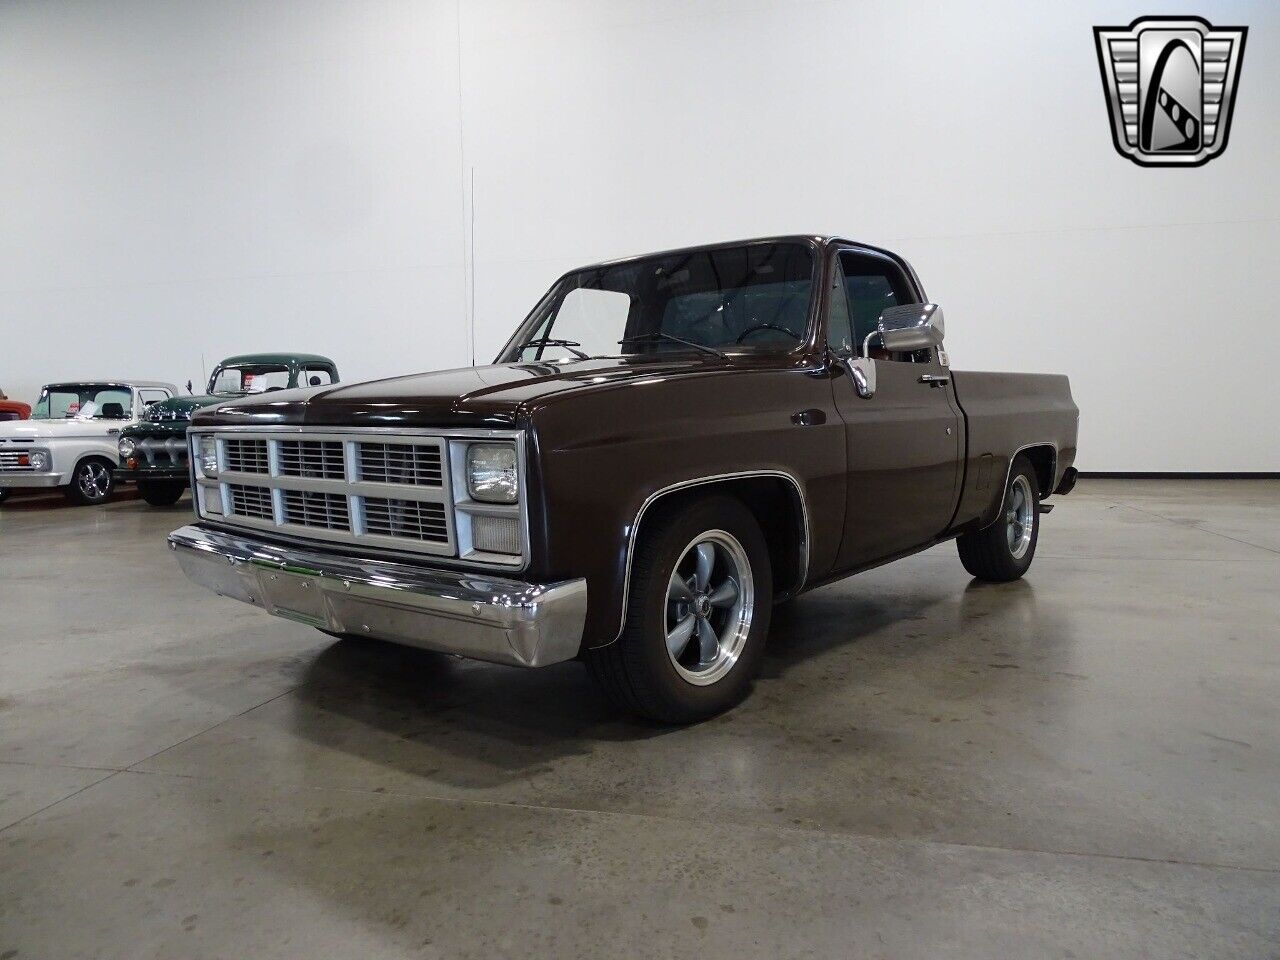 Brown 1984 GMC 1500  Small Block V8 Automatic Available Now!